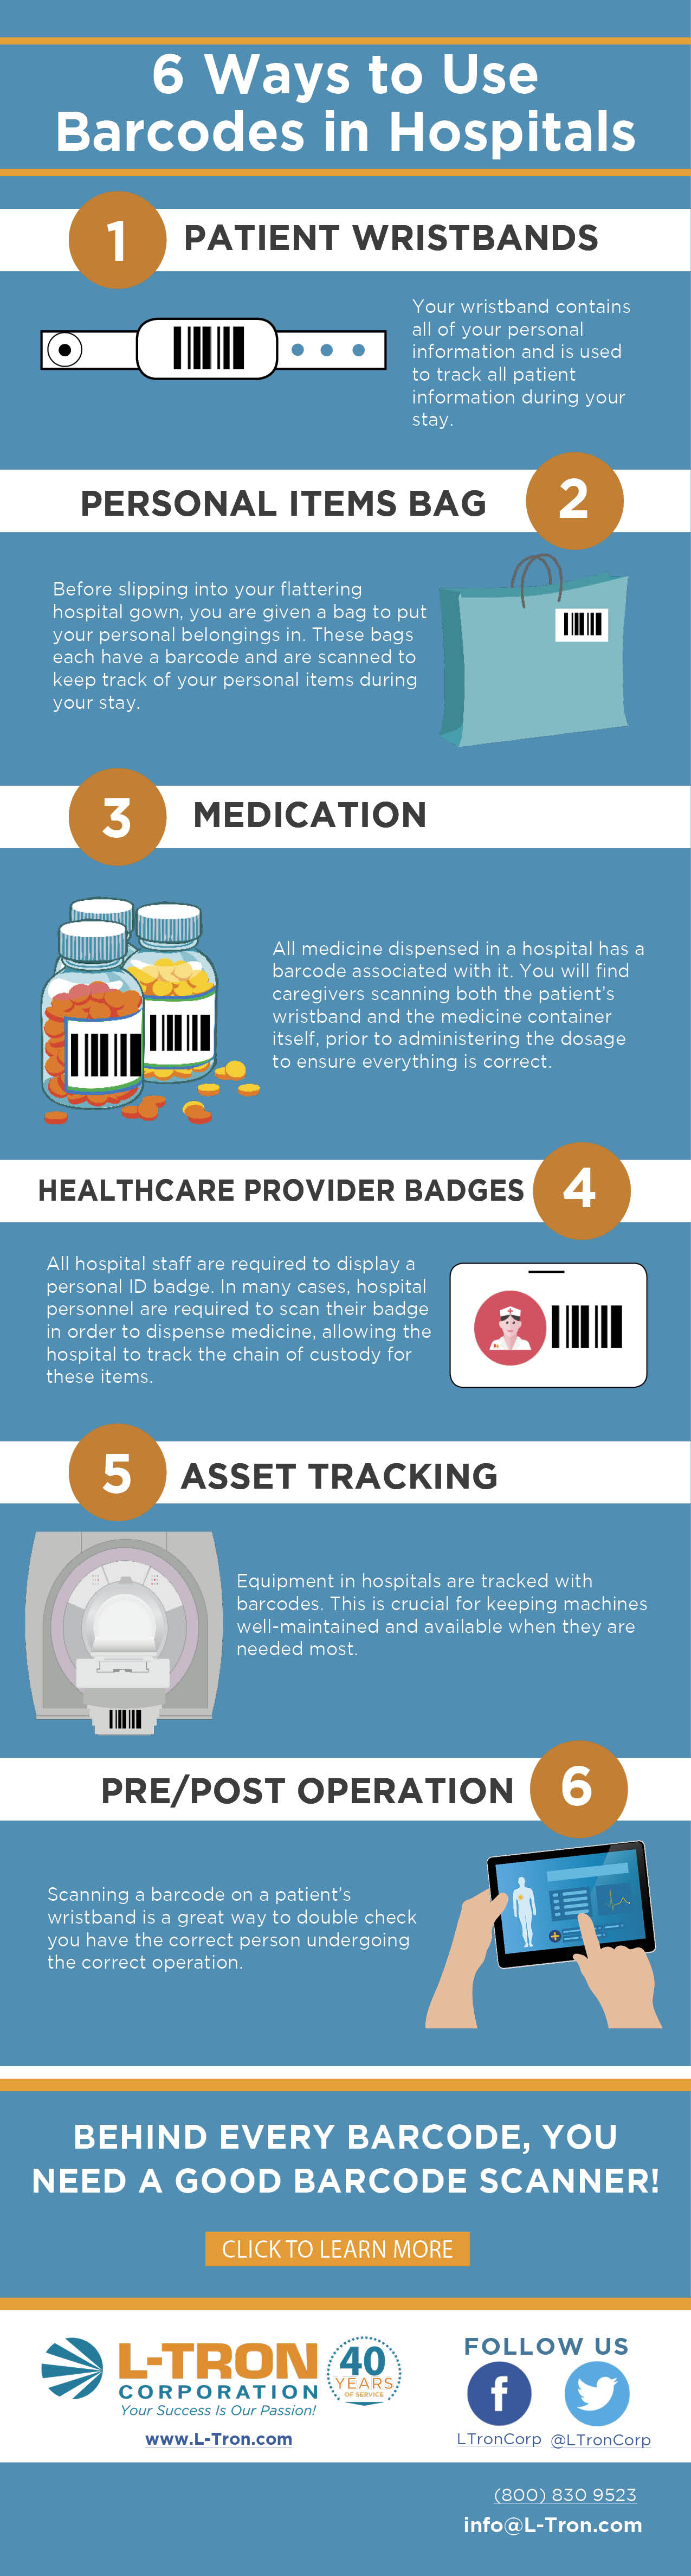 6 ways to use barcodes in hospitals